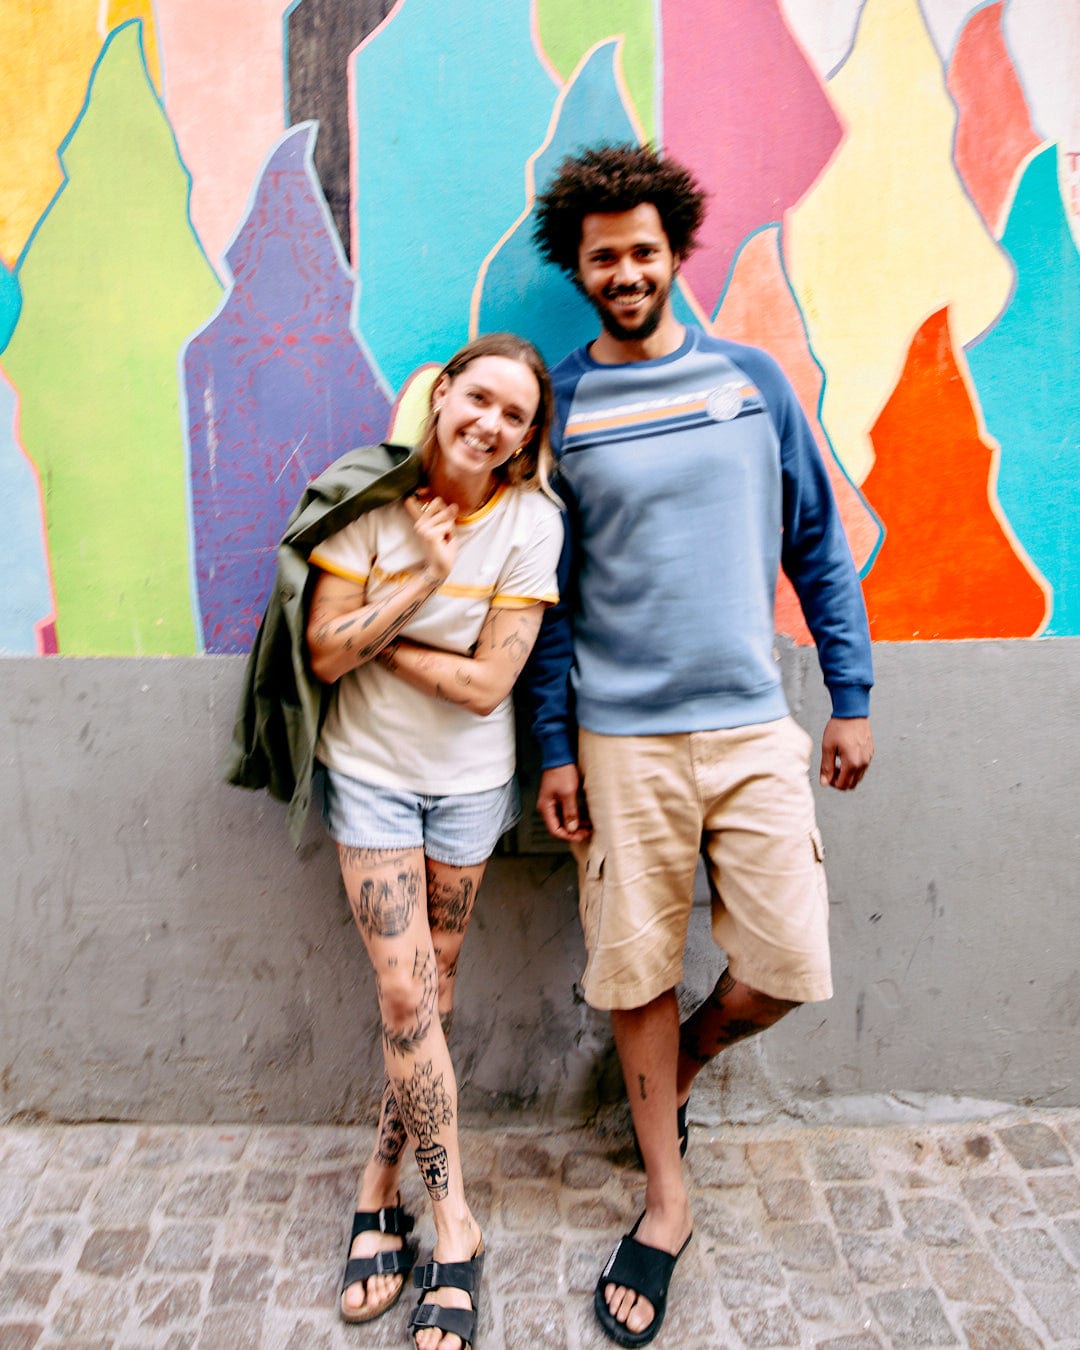 A smiling man and woman standing against a colorful graffiti wall, with the woman leaning slightly towards the man, both wearing shirts with Raglan sleeves. They are both wearing Saltrock's Spray Stripe - Recycled Mens Sweat in Blue.